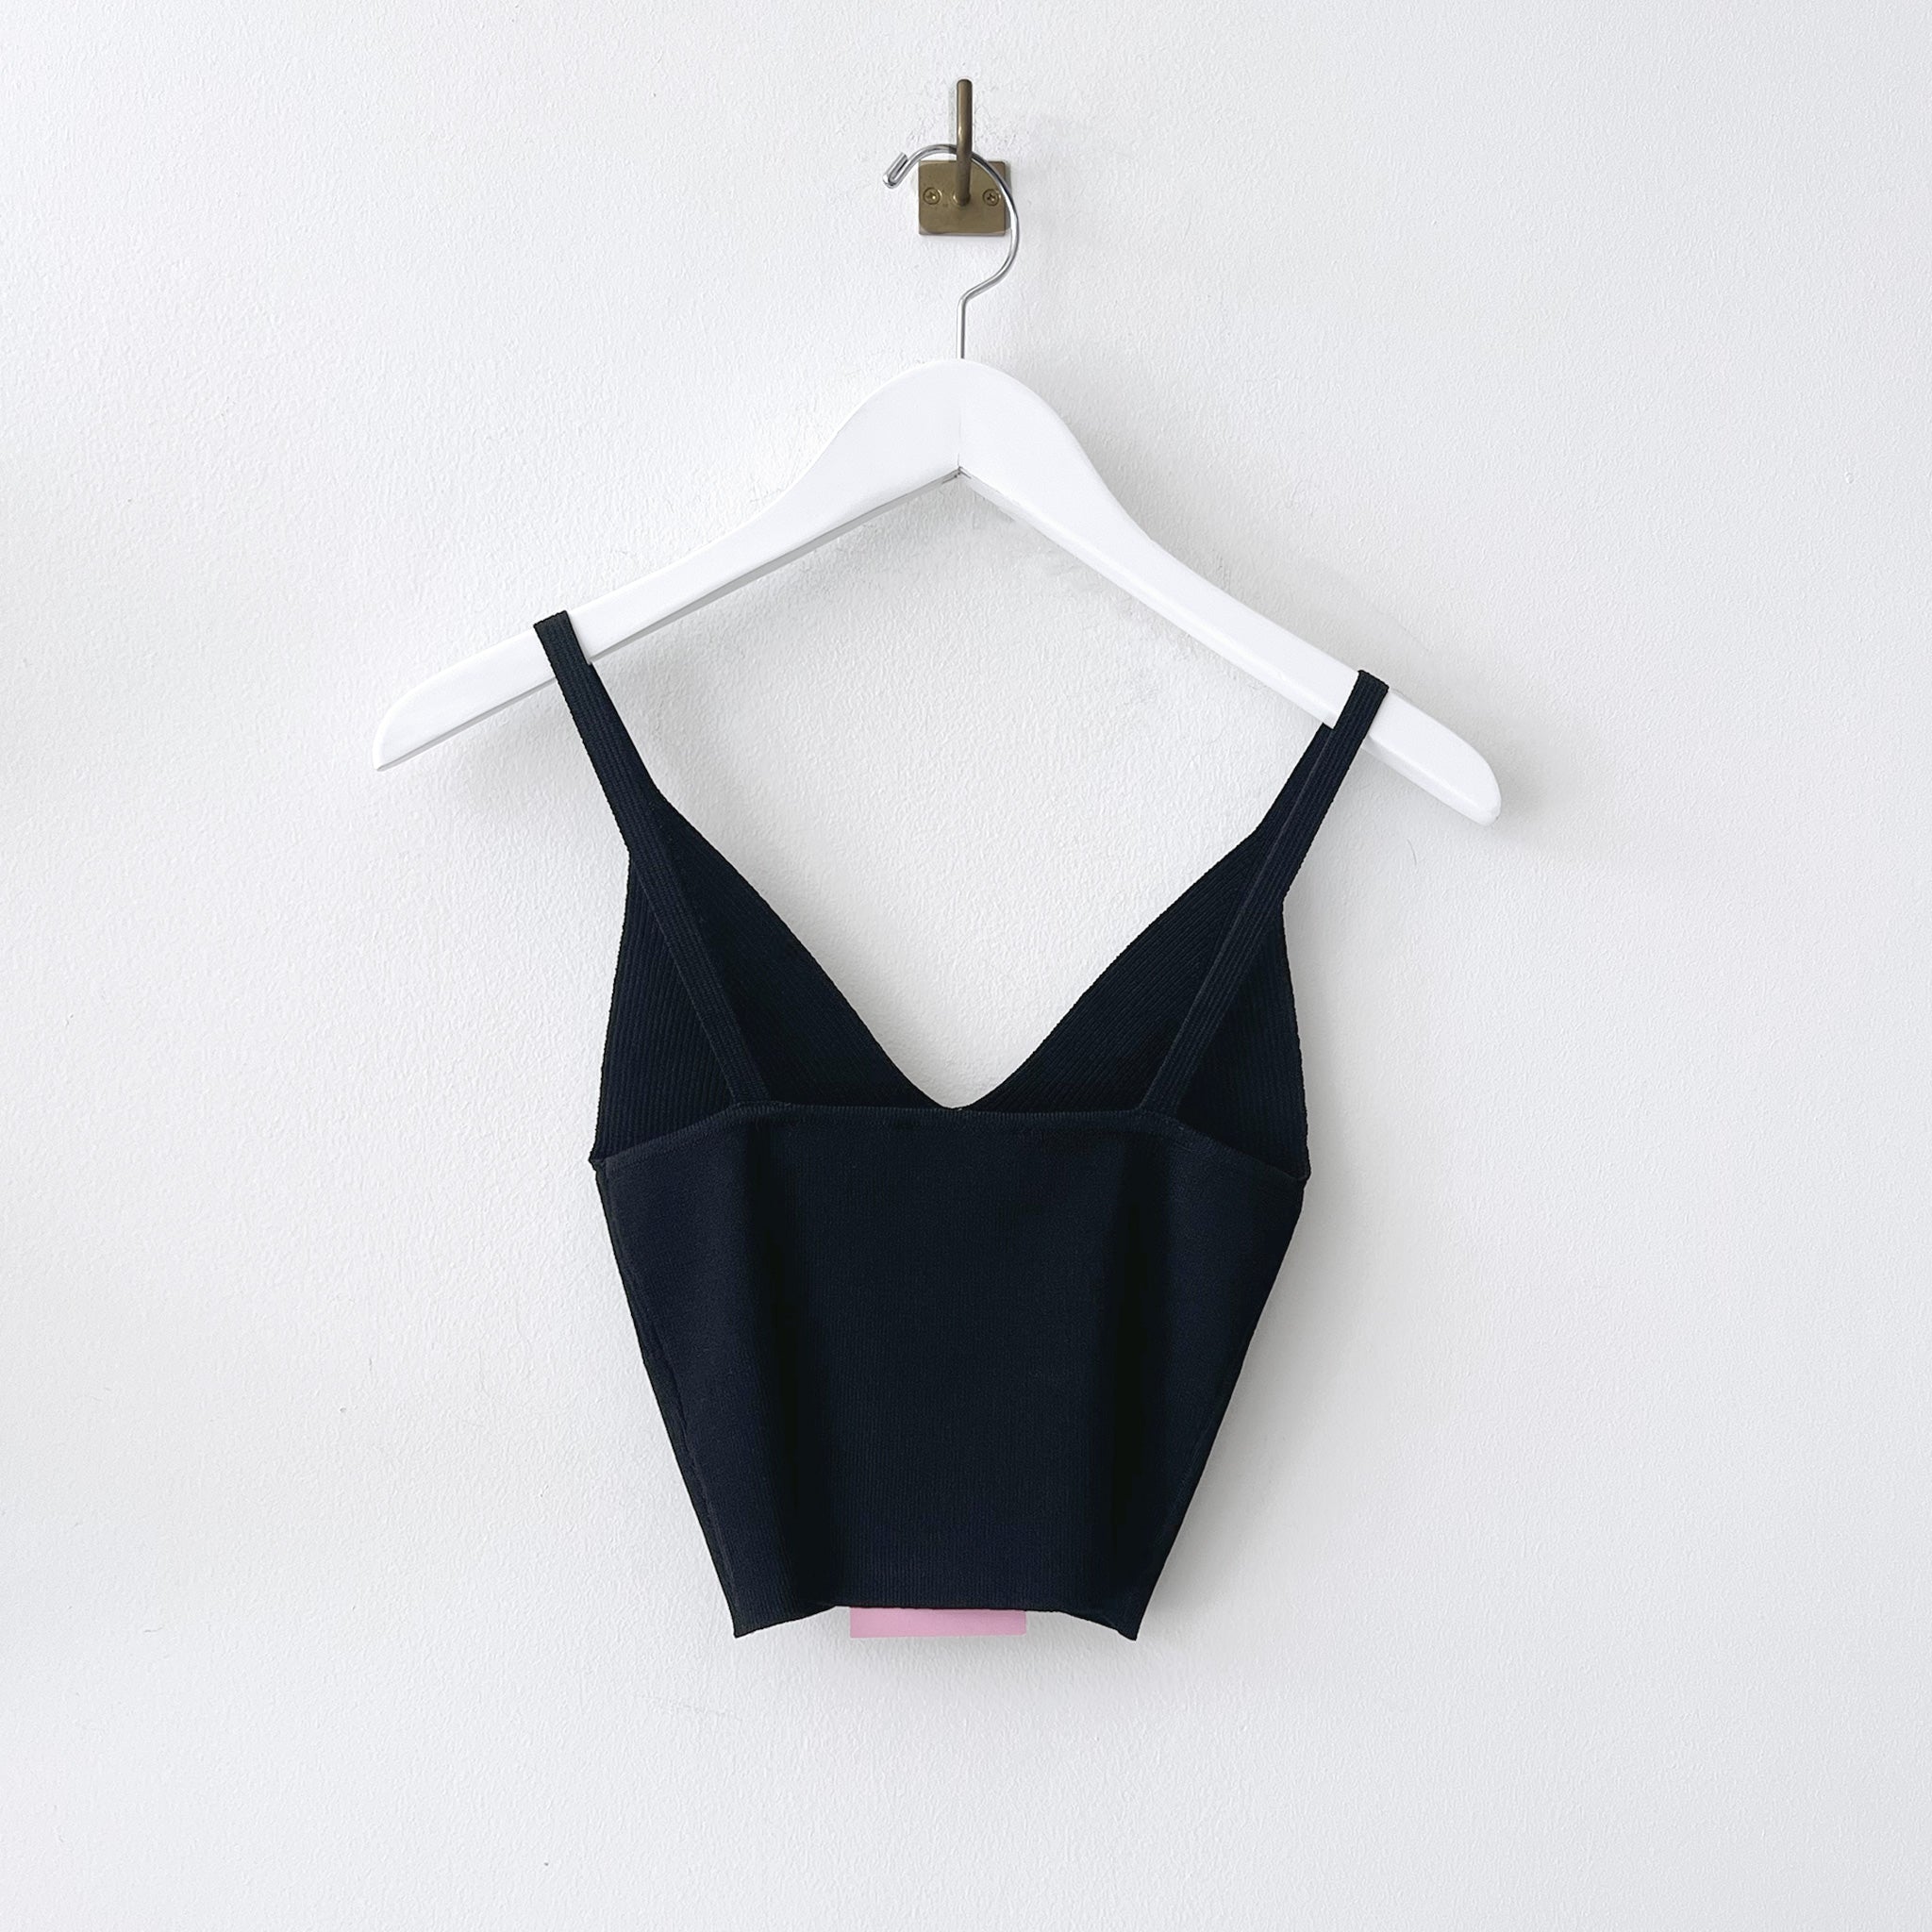 Back hanging photo of the Ribbed Knit Top - Black.